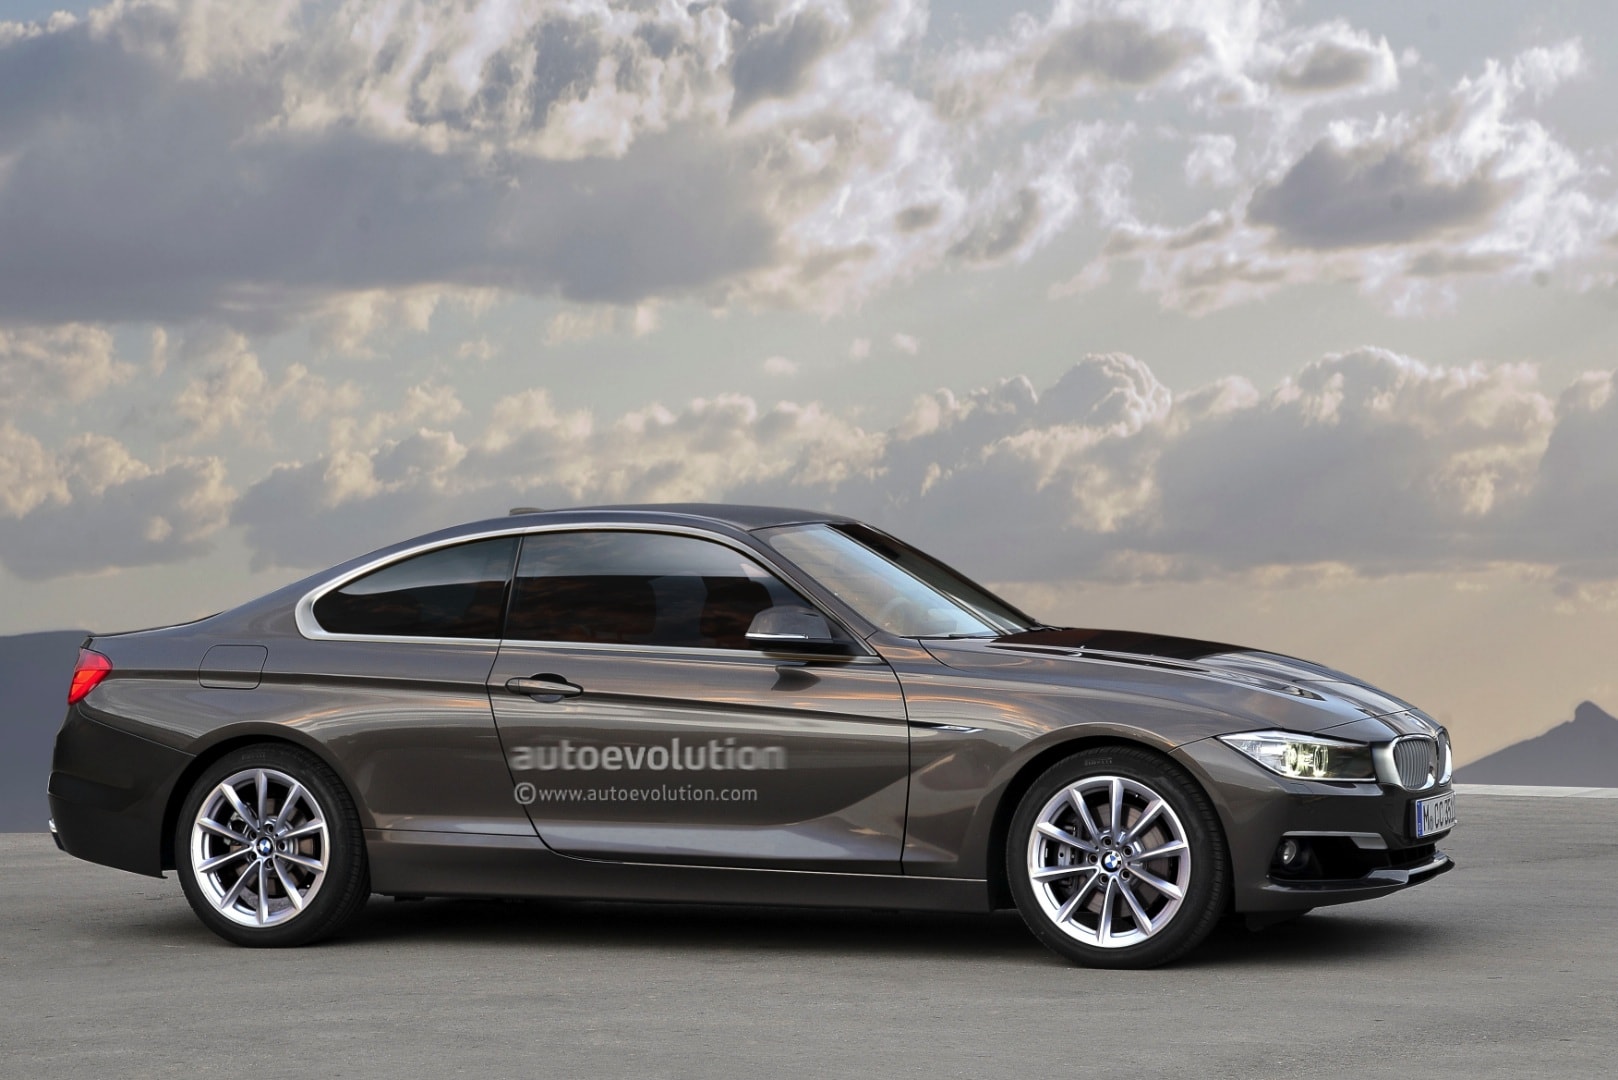 https://s1.cdn.autoevolution.com/images/news/2013-f32-bmw-4-series-coupe-rendering-43312_1.jpg